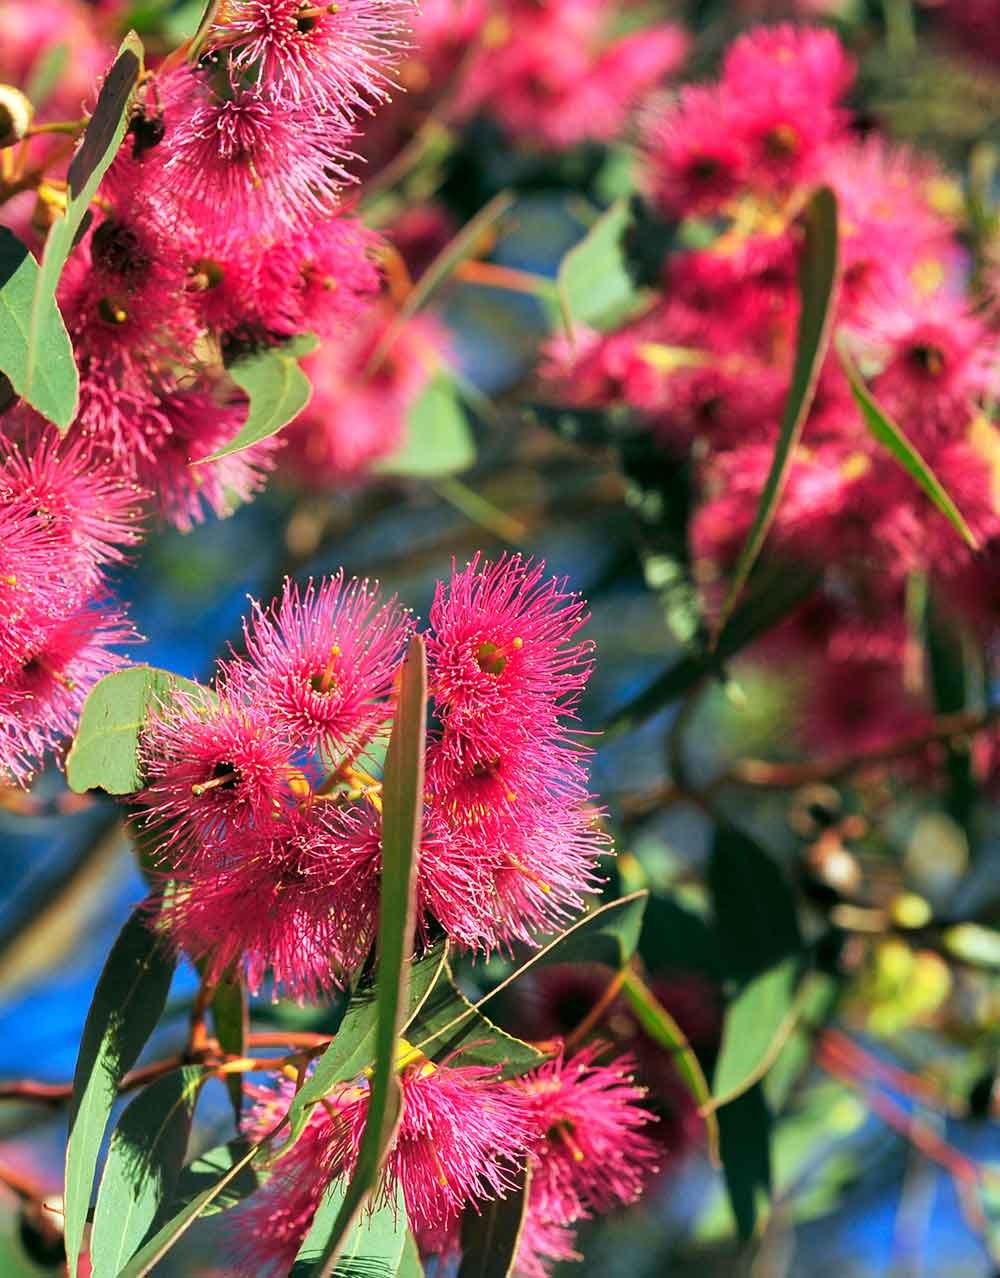 Red Flowering Gum, Corymbia ficifolia, Snippy's Yard